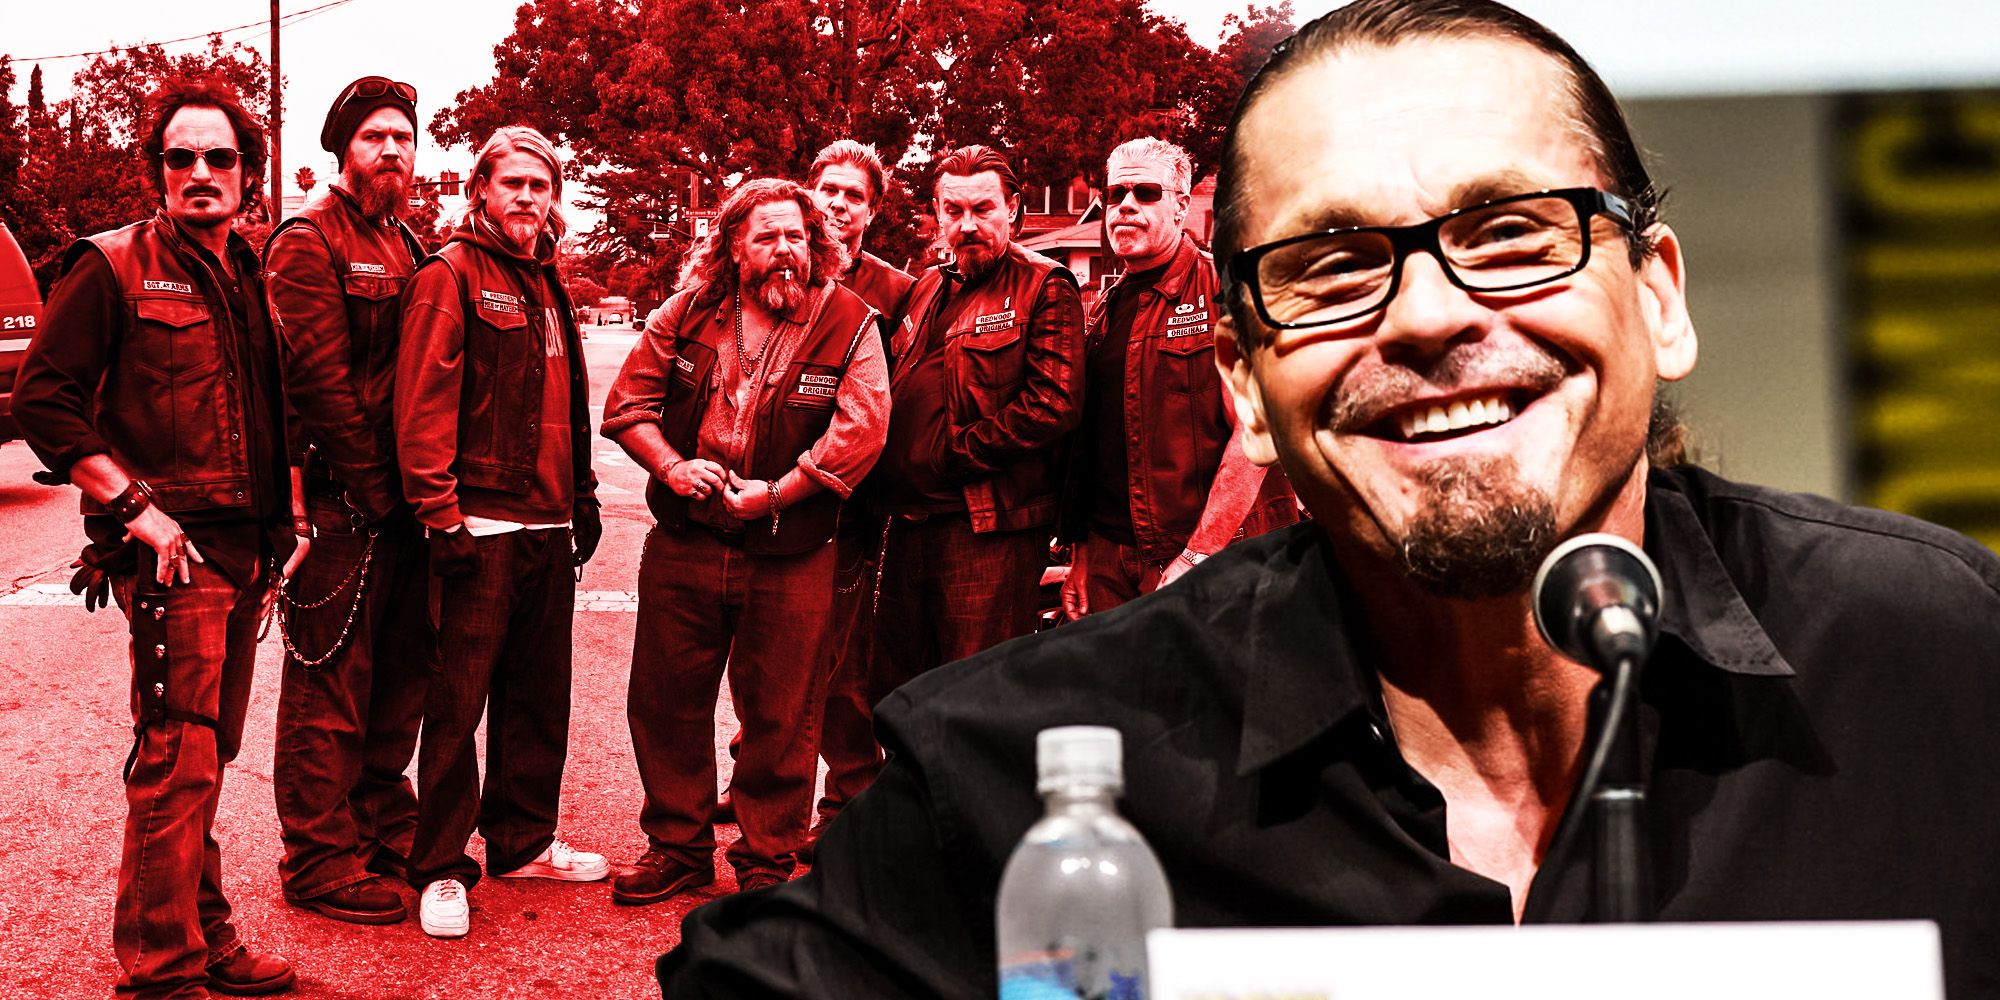 Sons of anarchy Creator kurt sutter Angered A Real Life Motorcycle Club